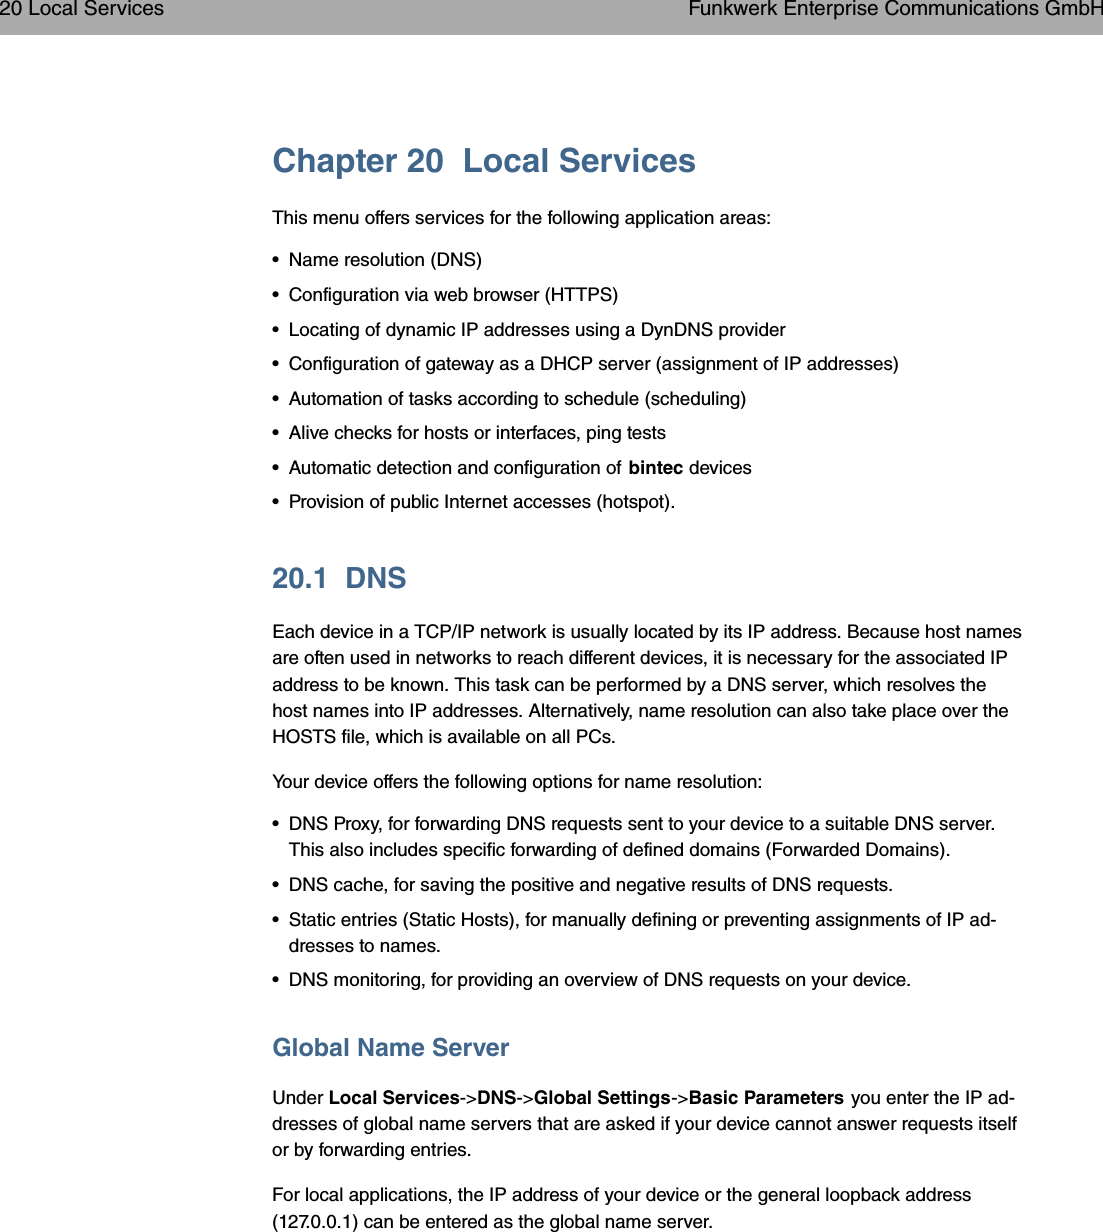 Chapter 20 Local ServicesThis menu offers services for the following application areas:• Name resolution (DNS)• Configuration via web browser (HTTPS)• Locating of dynamic IP addresses using a DynDNS provider• Configuration of gateway as a DHCP server (assignment of IP addresses)• Automation of tasks according to schedule (scheduling)• Alive checks for hosts or interfaces, ping tests• Automatic detection and configuration of bintec devices• Provision of public Internet accesses (hotspot).20.1 DNSEach device in a TCP/IP network is usually located by its IP address. Because host namesare often used in networks to reach different devices, it is necessary for the associated IPaddress to be known. This task can be performed by a DNS server, which resolves thehost names into IP addresses. Alternatively, name resolution can also take place over theHOSTS file, which is available on all PCs.Your device offers the following options for name resolution:• DNS Proxy, for forwarding DNS requests sent to your device to a suitable DNS server.This also includes specific forwarding of defined domains (Forwarded Domains).• DNS cache, for saving the positive and negative results of DNS requests.• Static entries (Static Hosts), for manually defining or preventing assignments of IP ad-dresses to names.• DNS monitoring, for providing an overview of DNS requests on your device.Global Name ServerUnder Local Services-&gt;DNS-&gt;Global Settings-&gt;Basic Parameters you enter the IP ad-dresses of global name servers that are asked if your device cannot answer requests itselfor by forwarding entries.For local applications, the IP address of your device or the general loopback address(127.0.0.1) can be entered as the global name server.20 Local Services Funkwerk Enterprise Communications GmbH272 bintec WLAN and Industrial WLAN